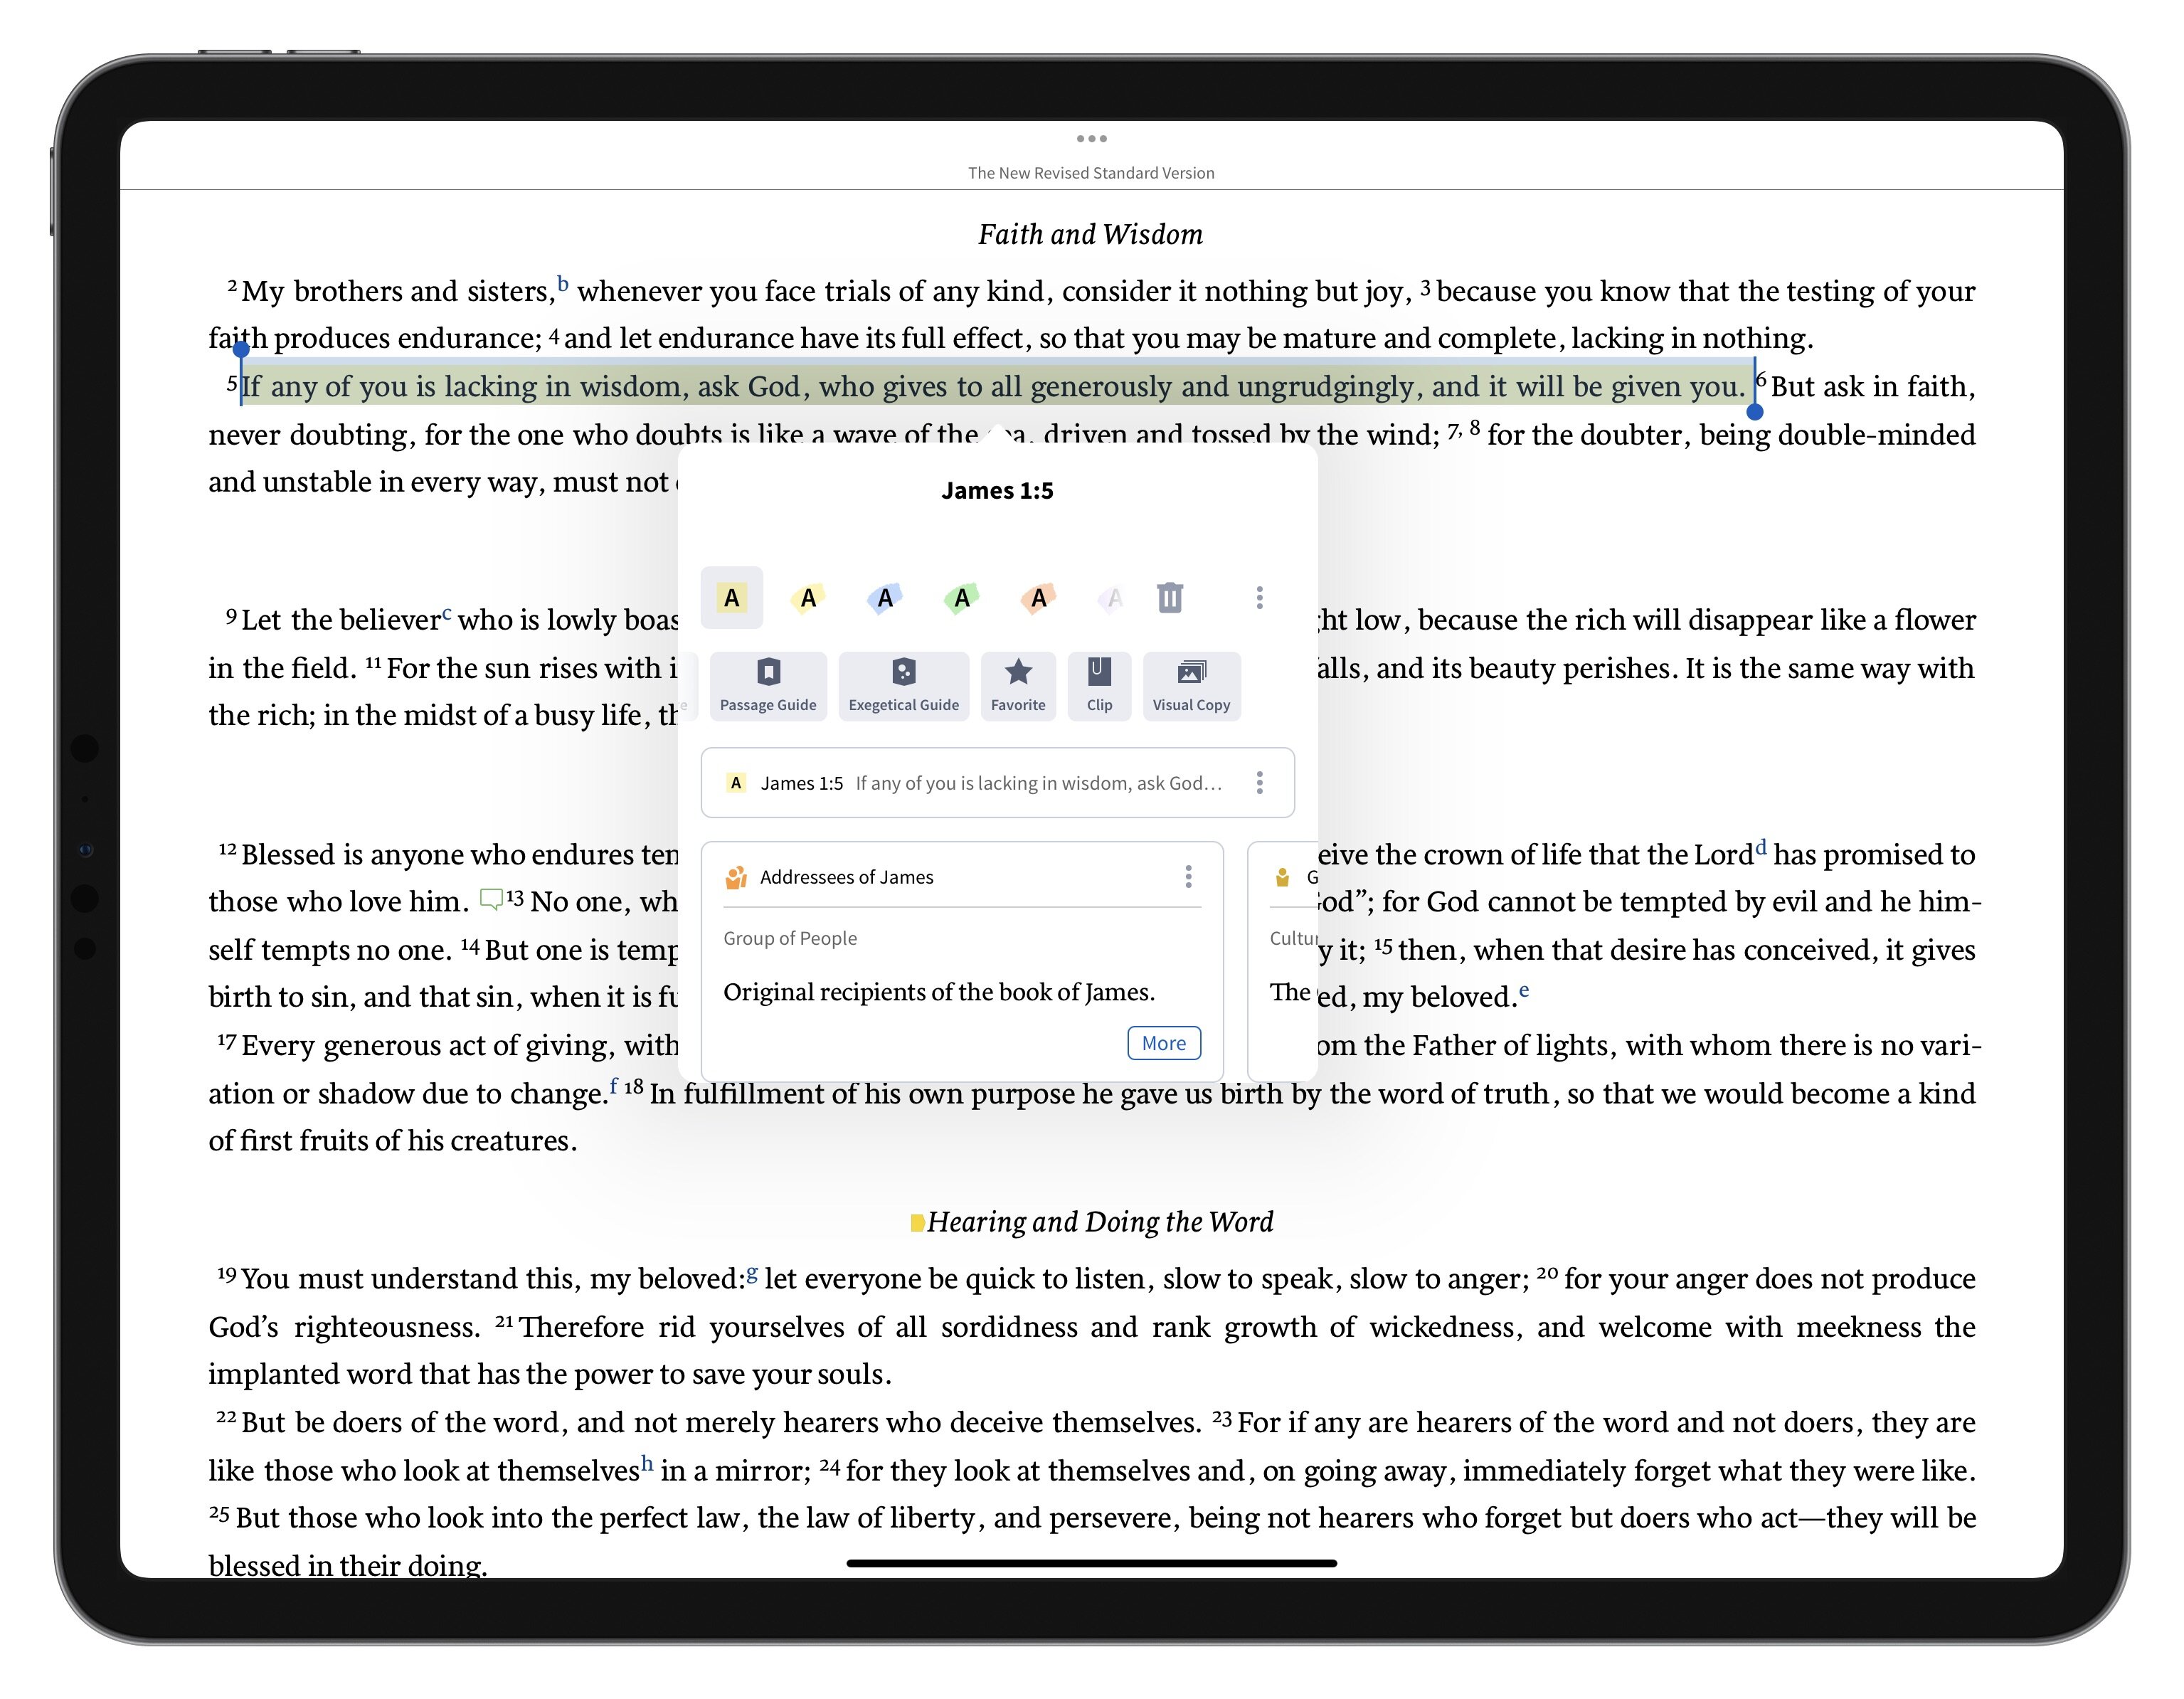 A picture of an iPad with a resource open and some text selected. A menu has appeared which allows the user to select a highlight style, view the Passage Guide, and more.